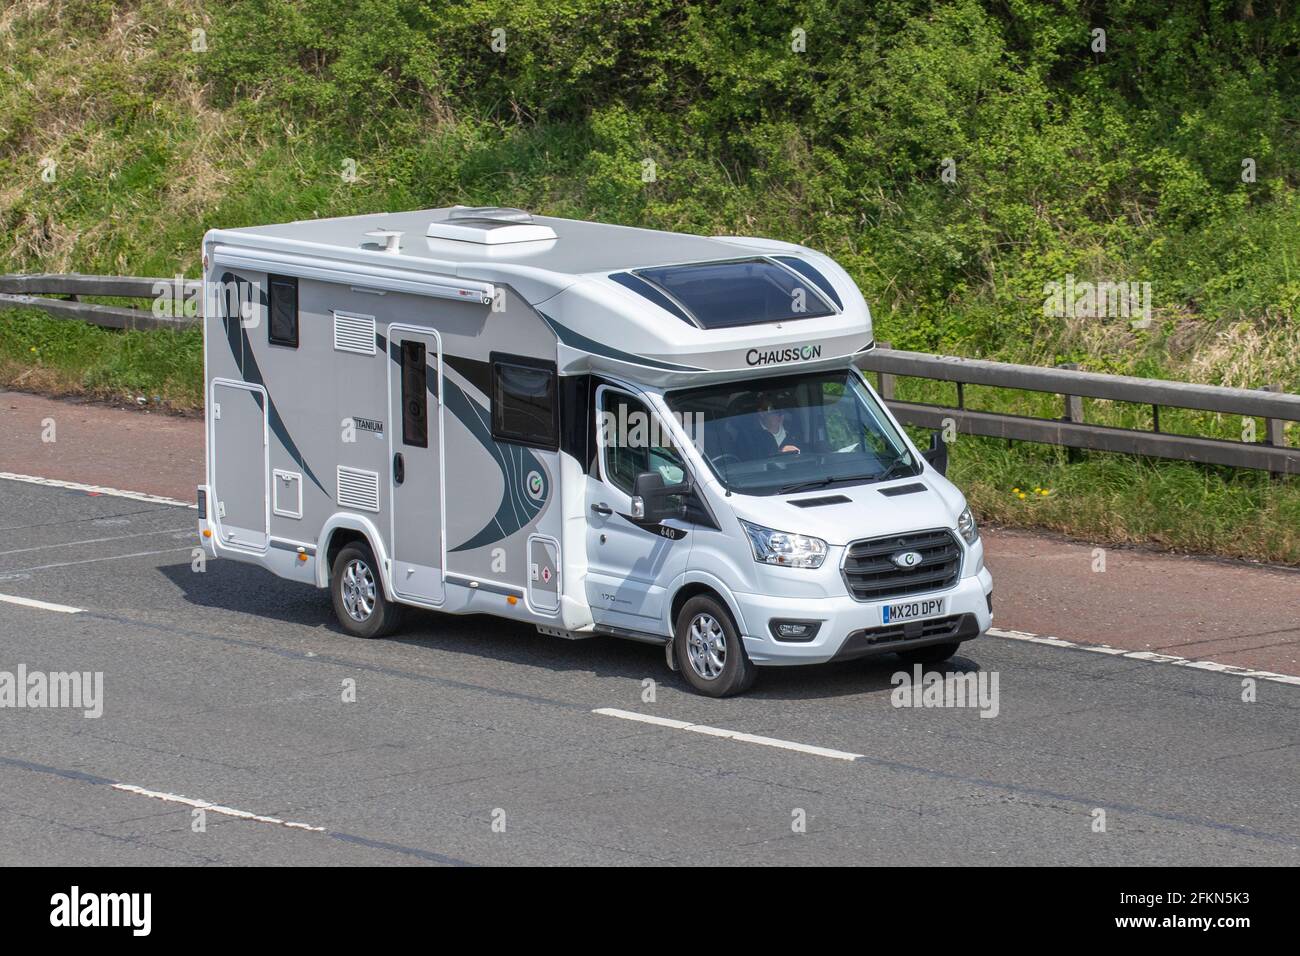 2020 Chausson, 170 automatic 640 Titanium; Motorhomes, campervans on  Britain's roads, RV leisure vehicle, family holidays, caravanette  vacations, Touring caravan holiday, van conversions, Vanagon autohome, life  on the road Stock Photo - Alamy